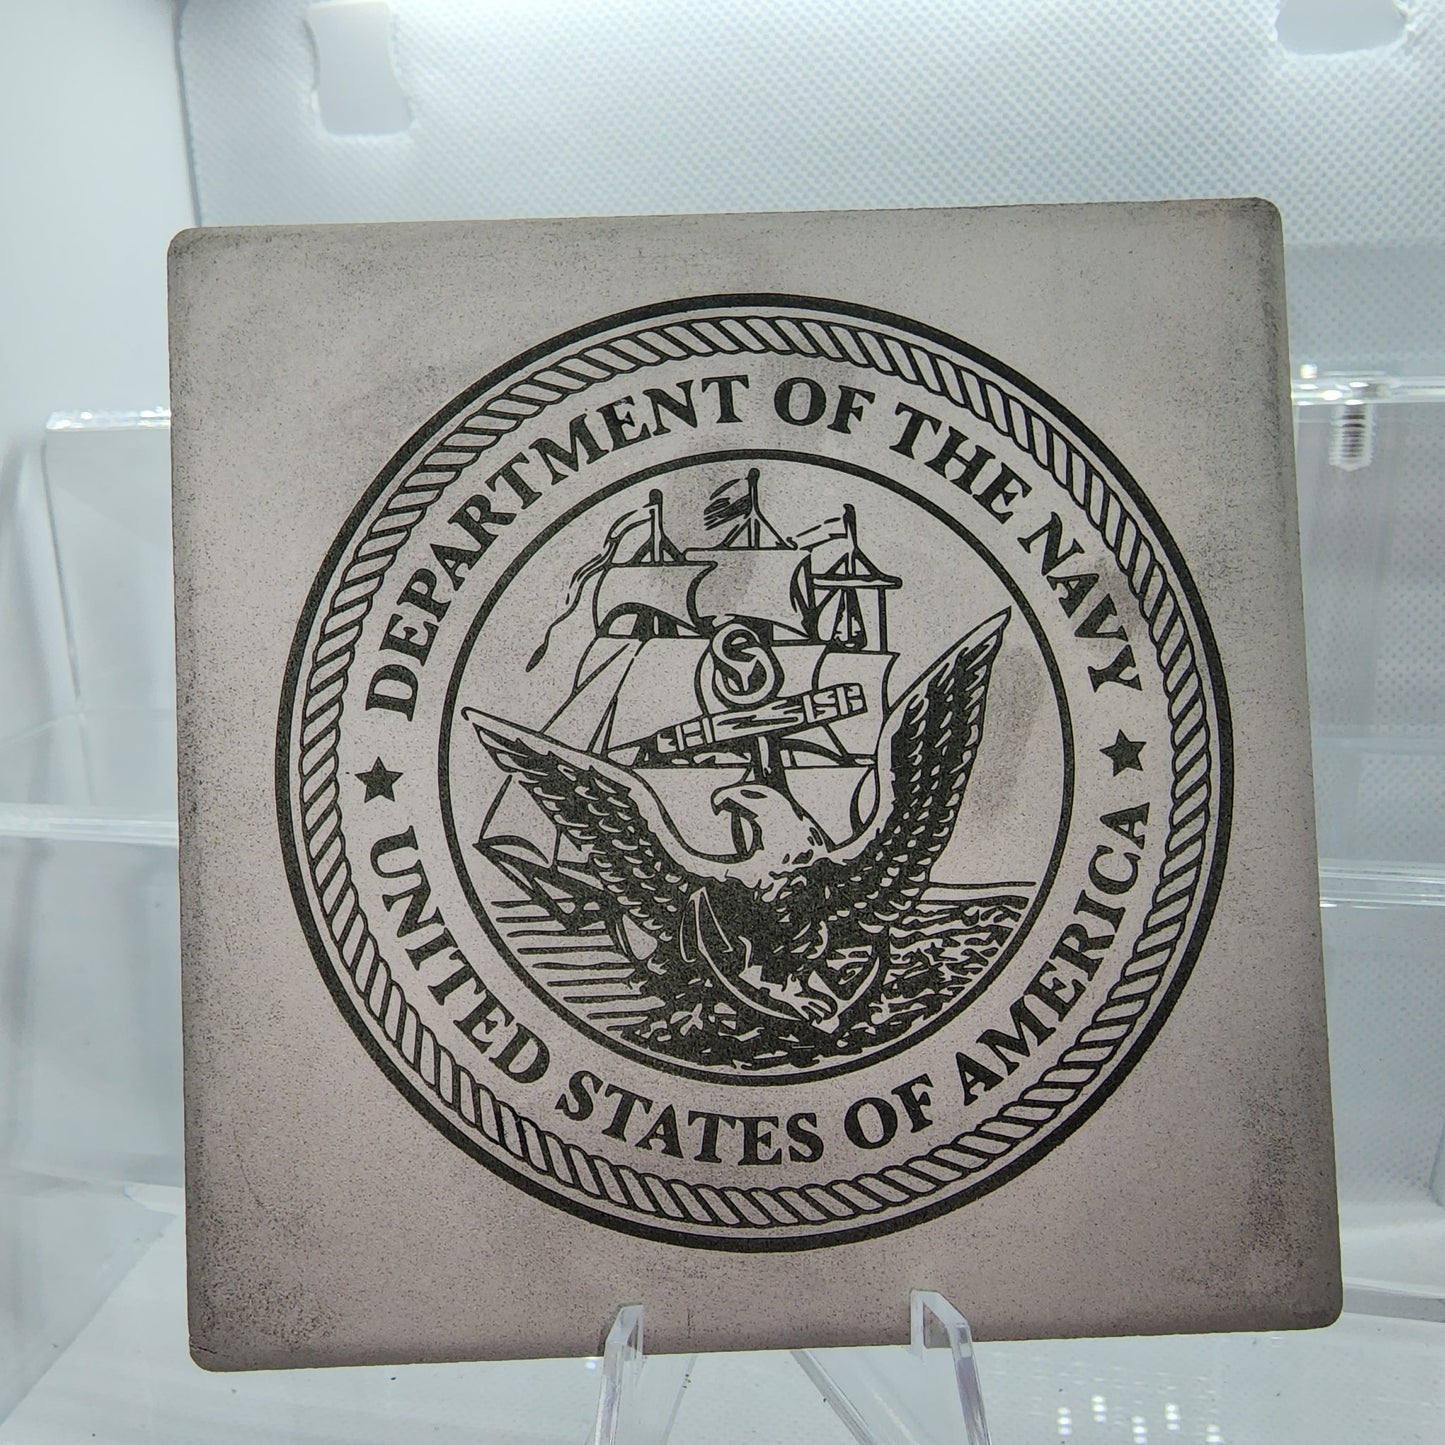 Coaster Set - US Navy Collection